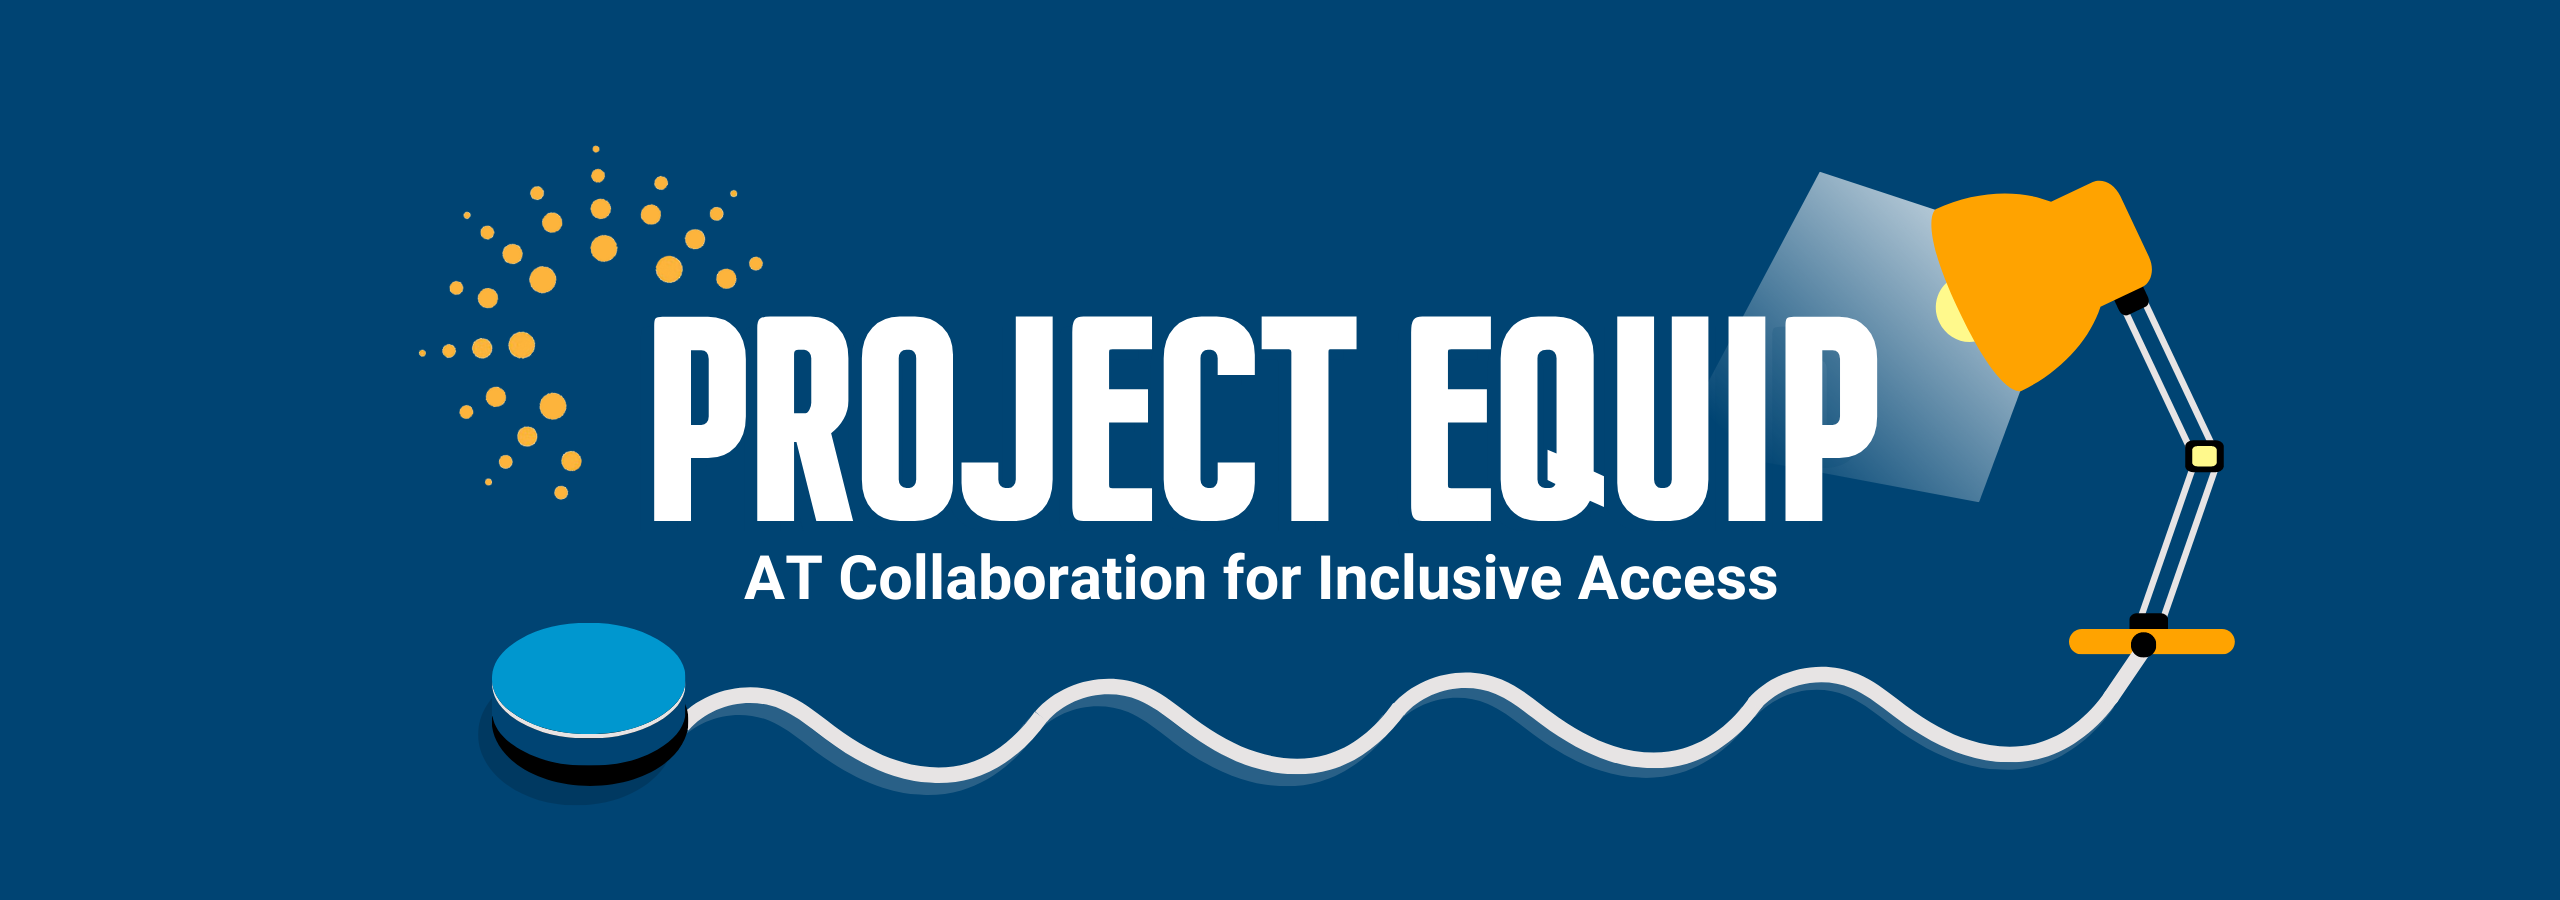 Project Equip Logo